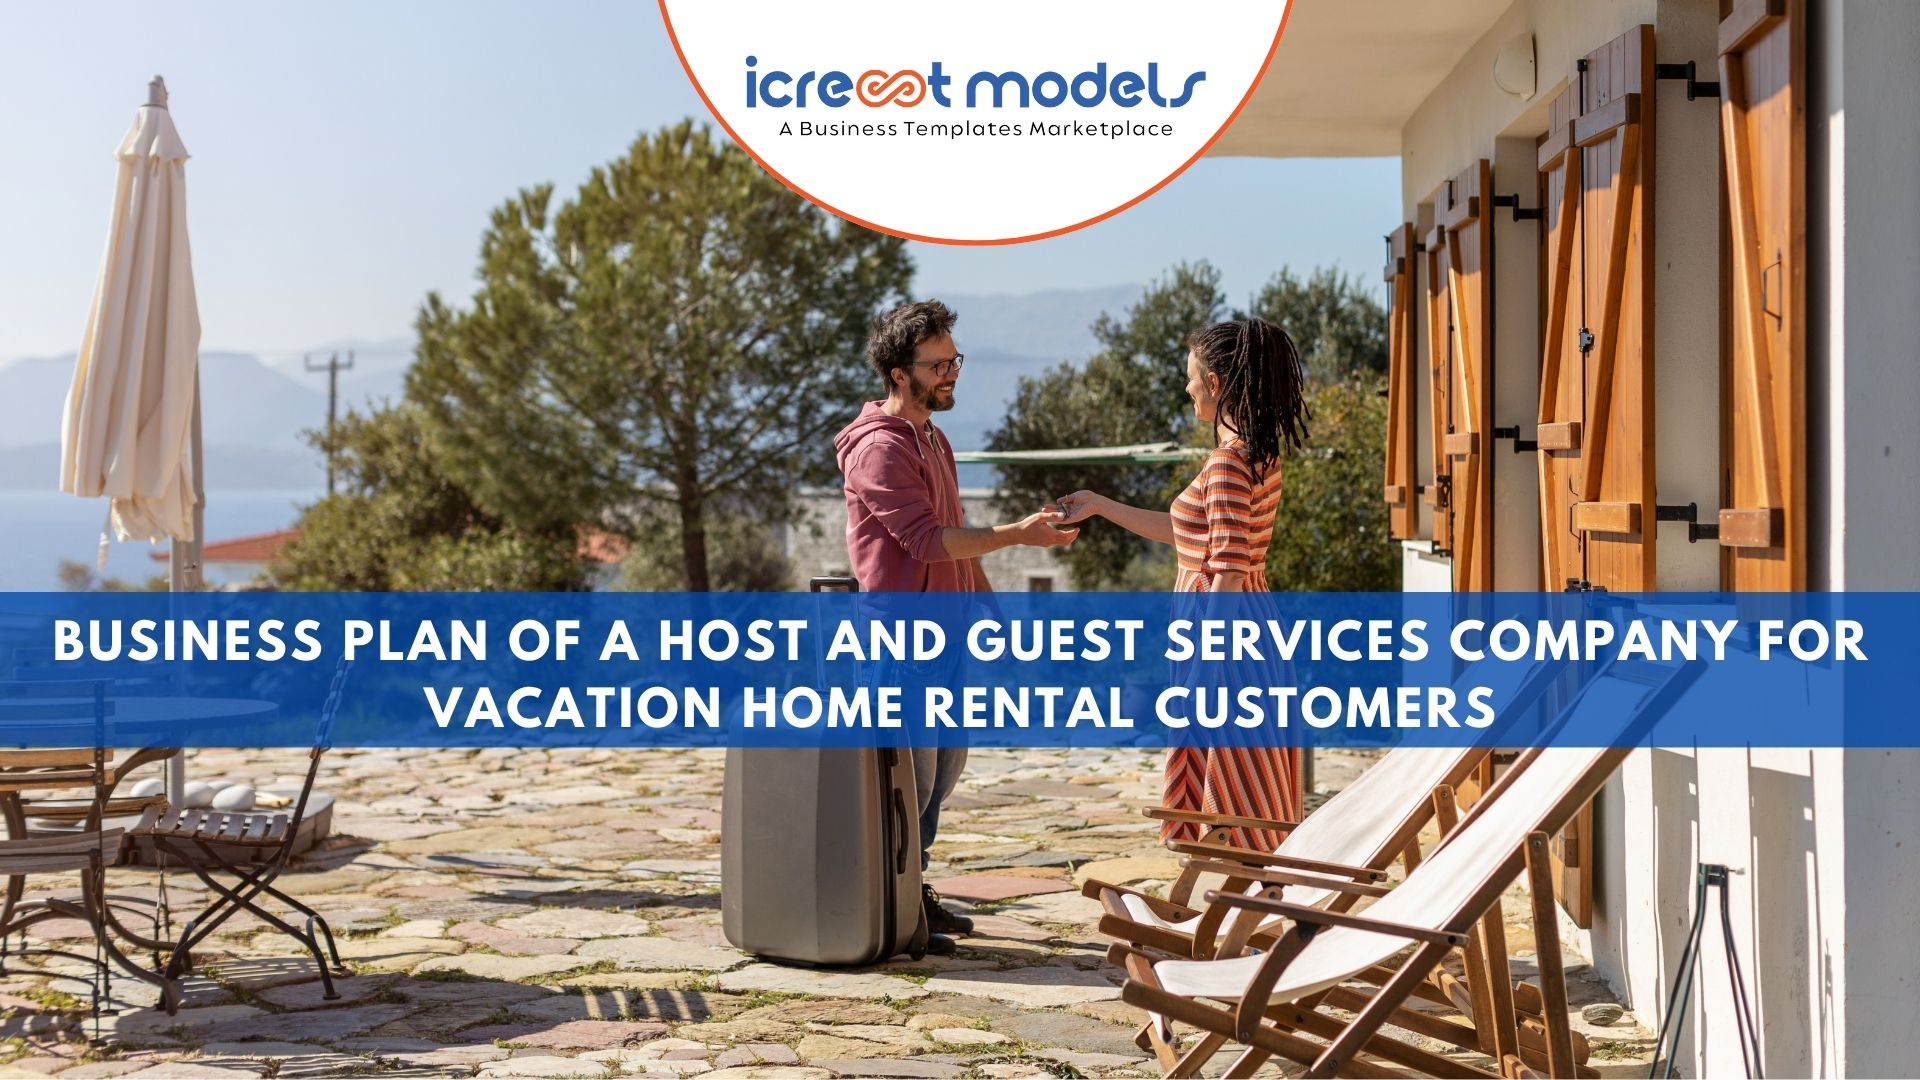 Business Plan of a Host and Guest Services Company for Vacation Home Rental Customers